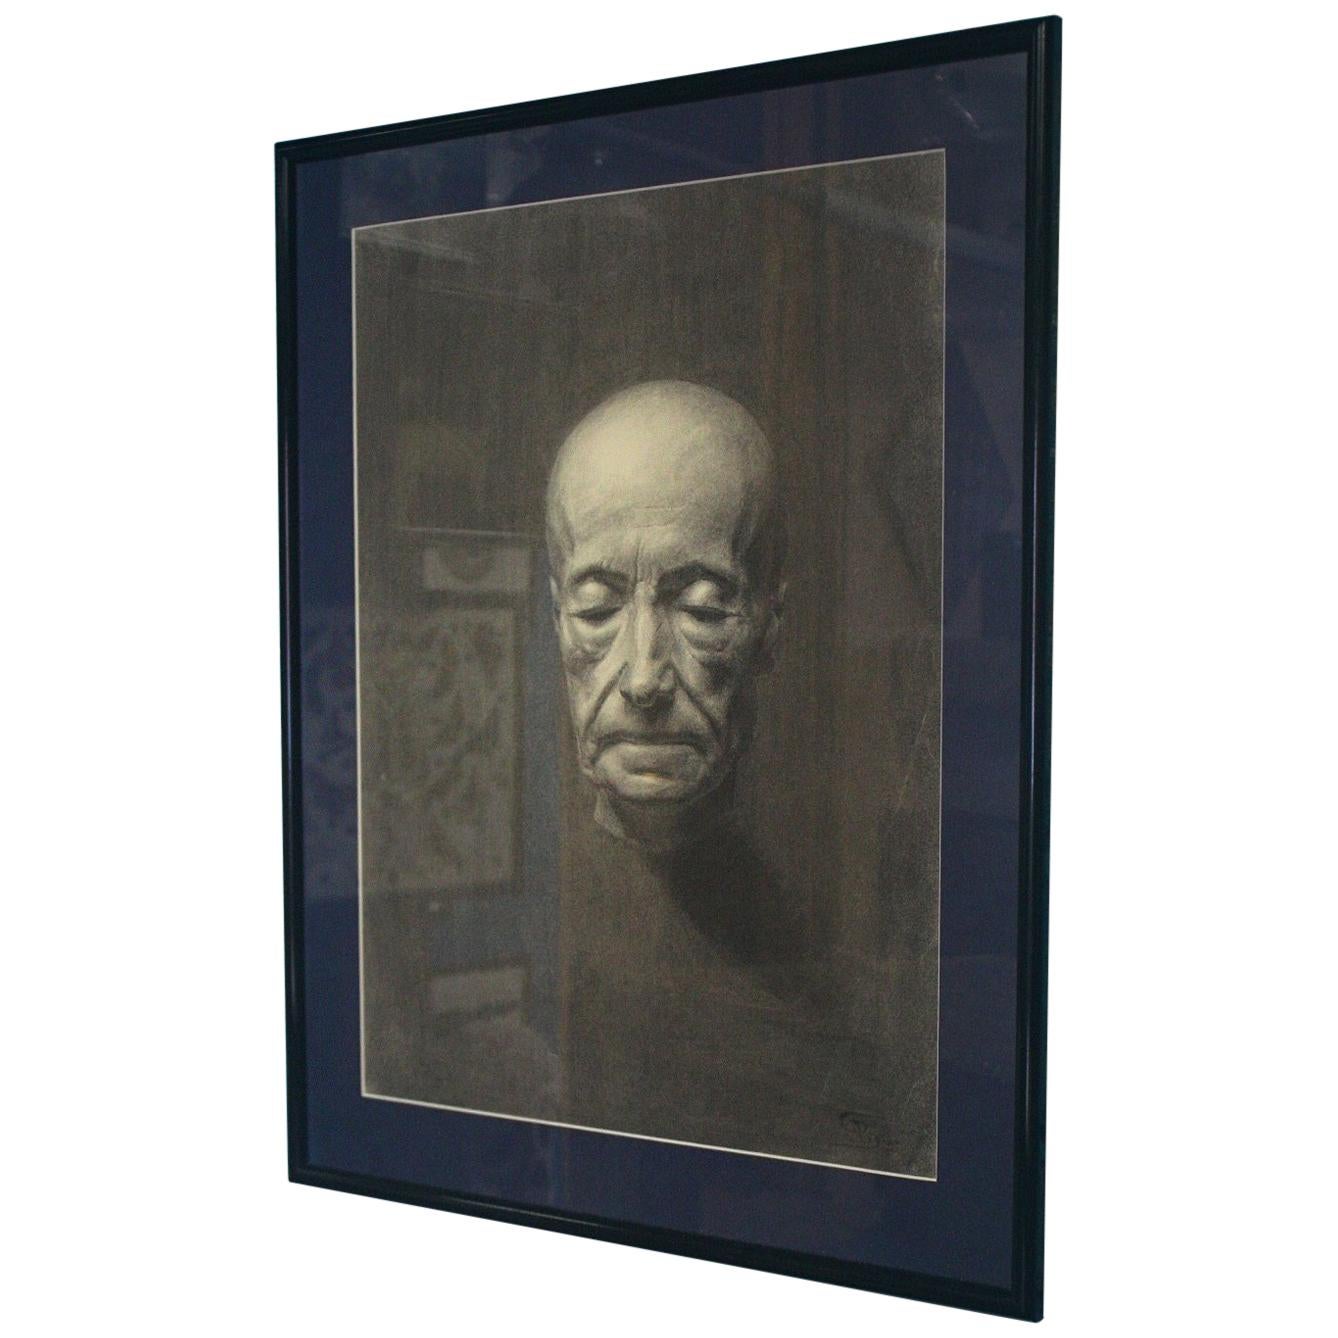 Highly unusual and extremely well executed charcoal on paper, portrait of a death mask. 

Monogram in bottom right corner SAB, and dated 1993 

The piece has been sympathetically framed and glazed in a ebonized cushion frame with a navy mount